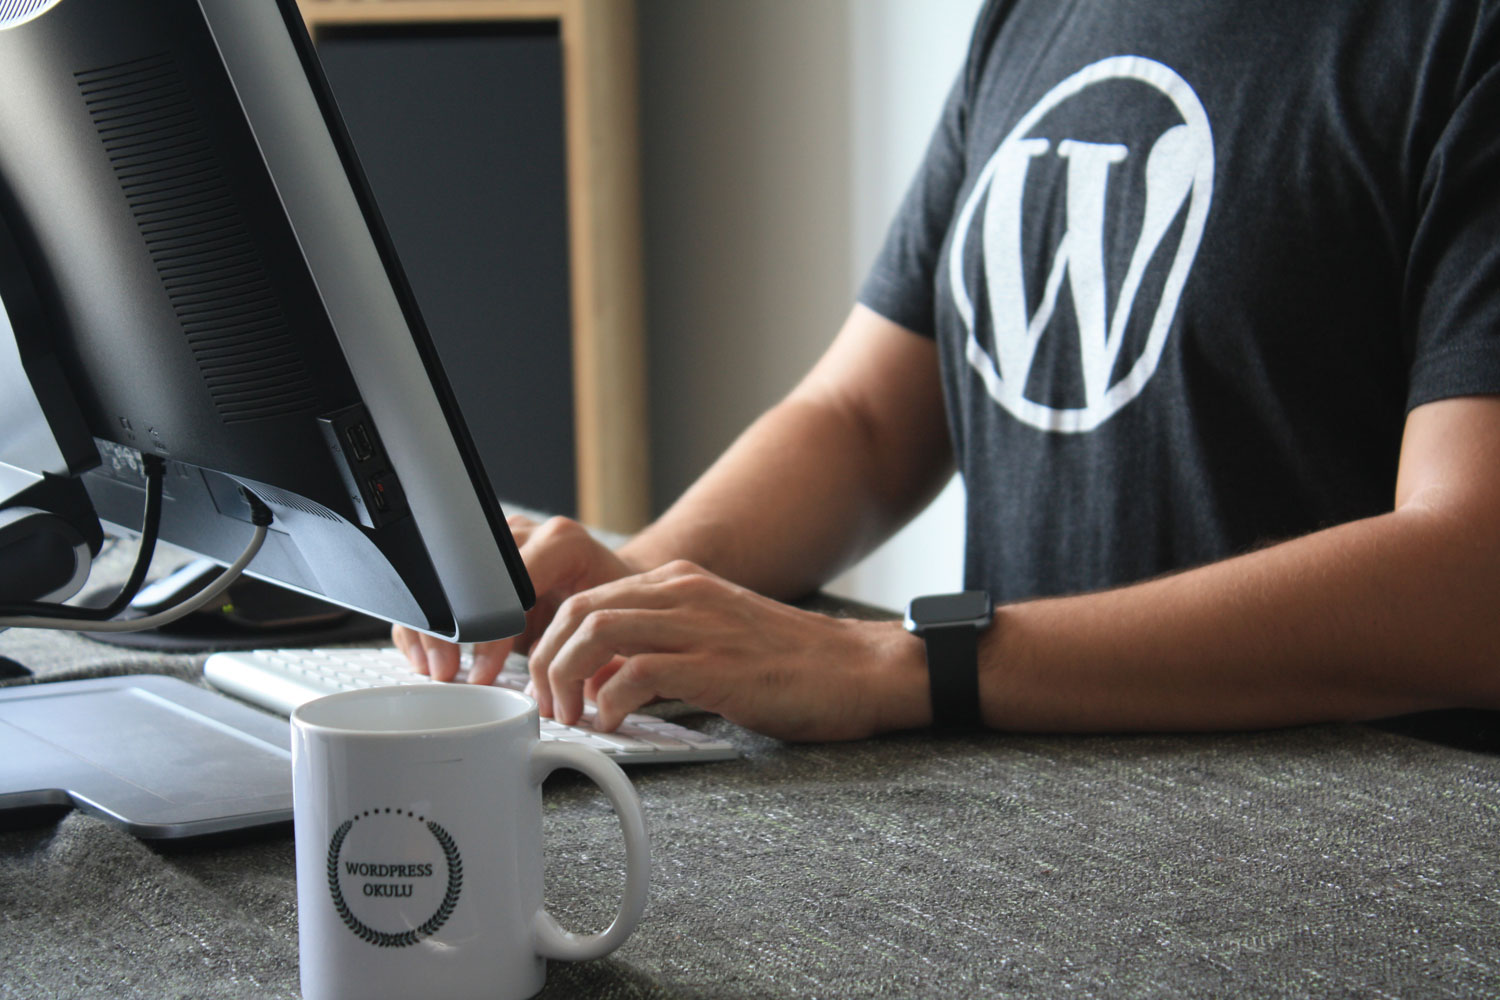 The role of user experience in WordPress design and development and how to improve it